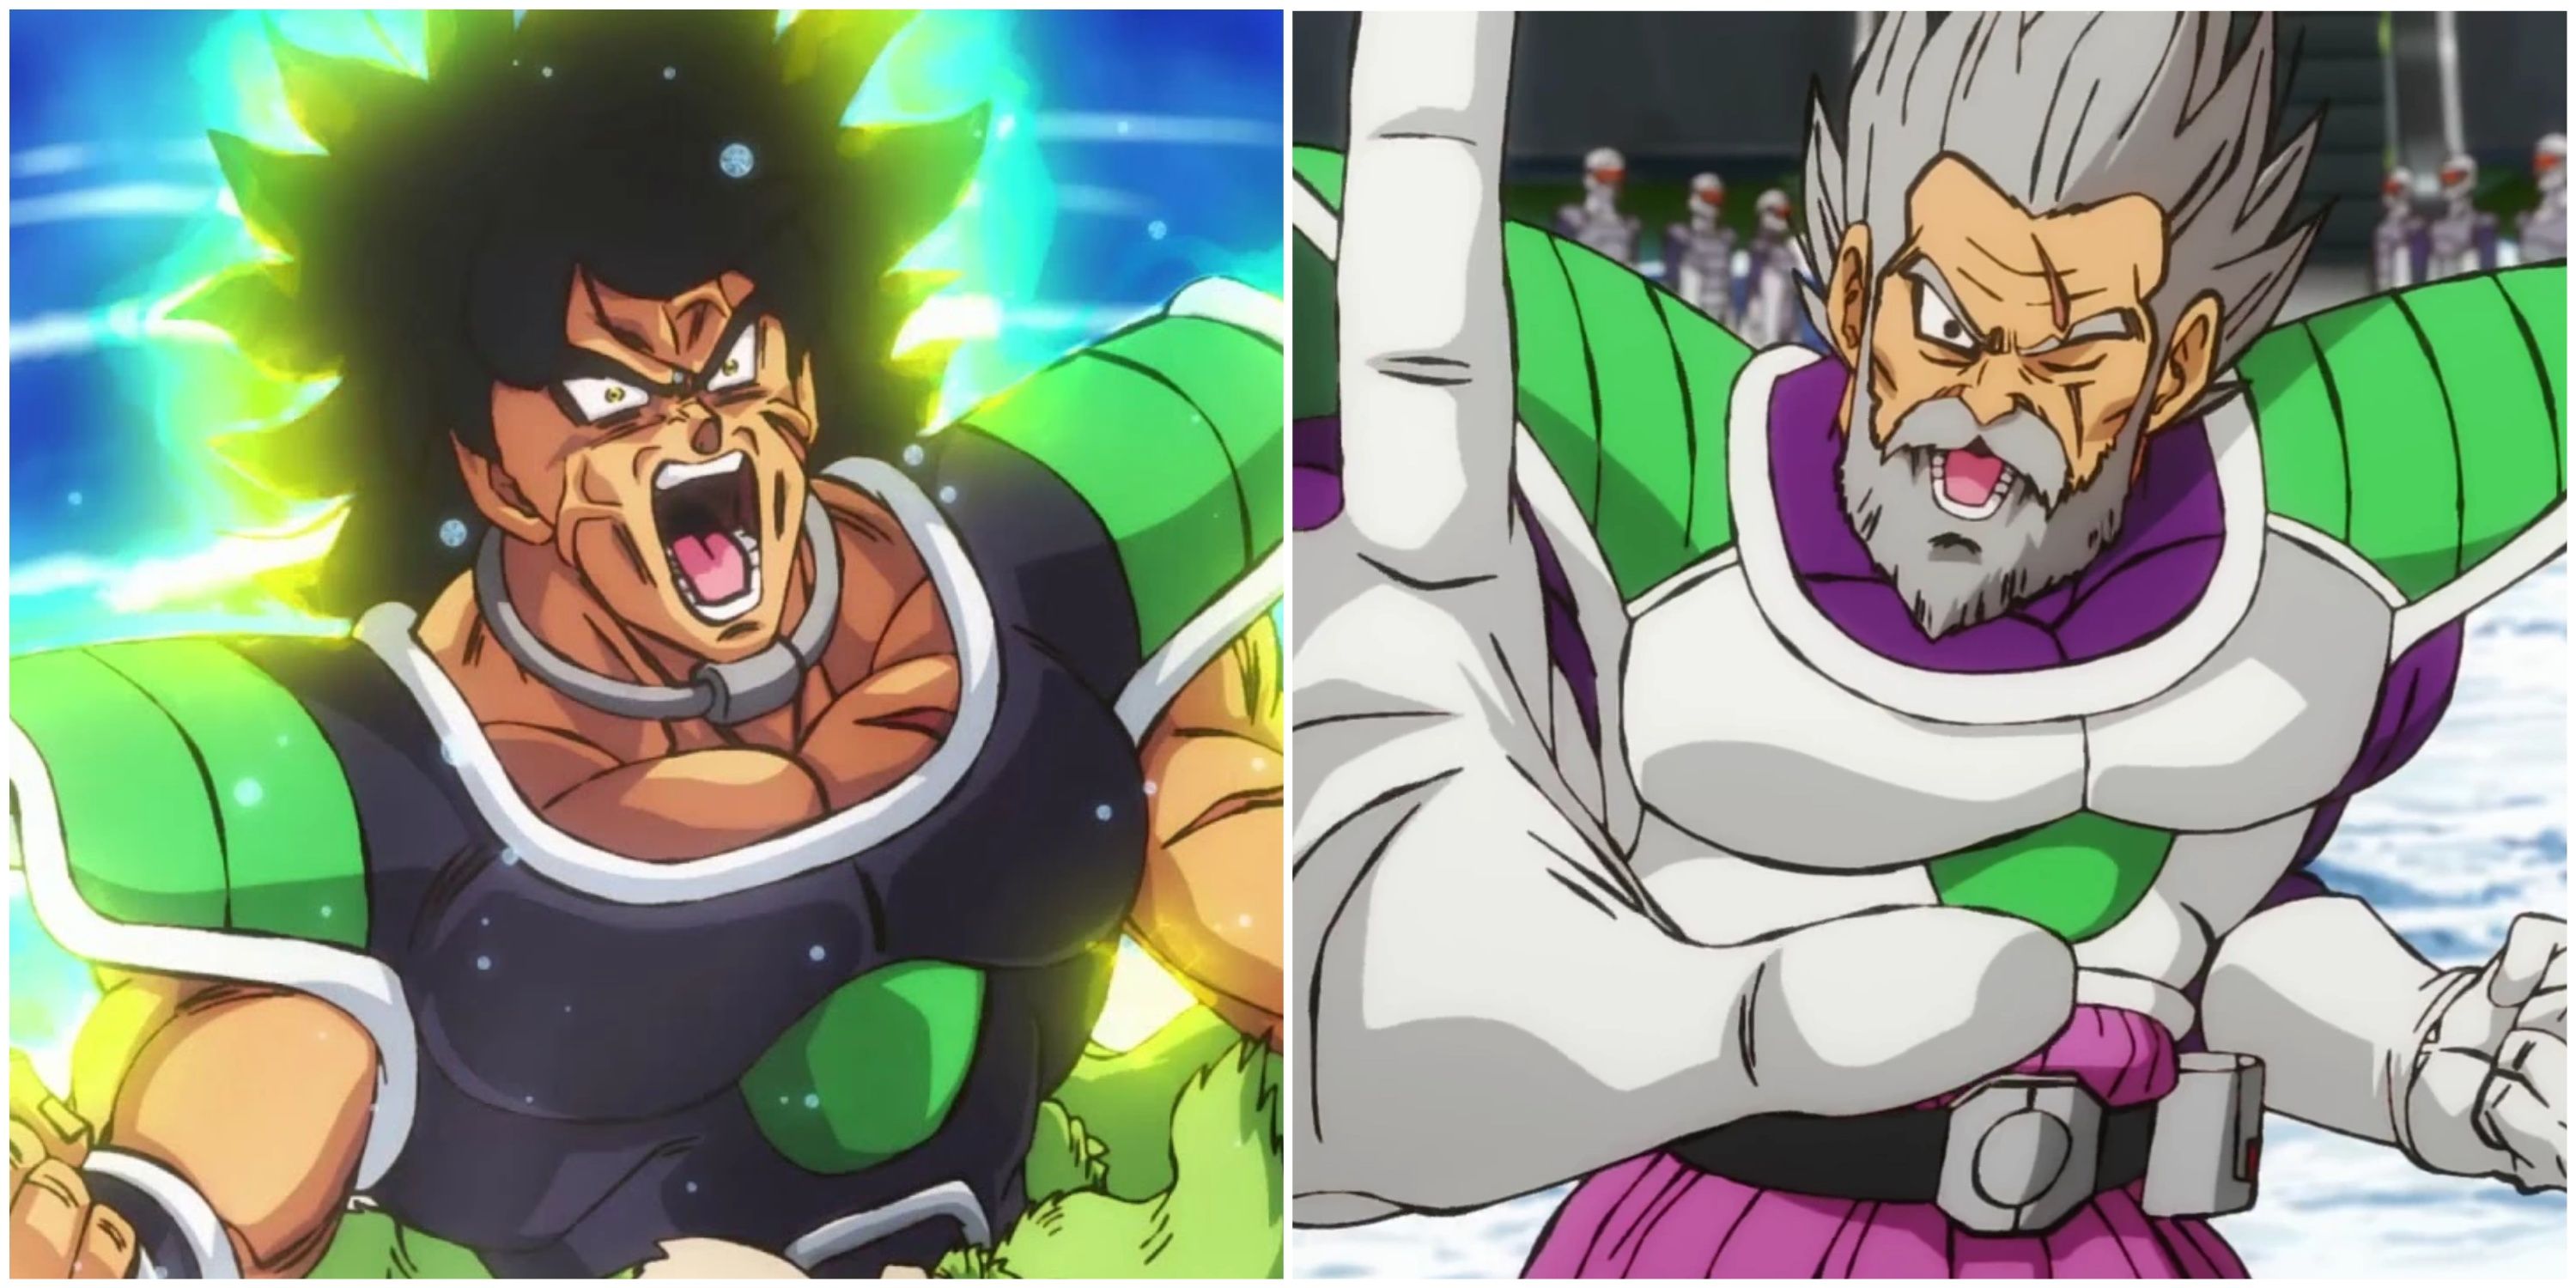 Broly and Paragus in Dragon Ball Super: Broly